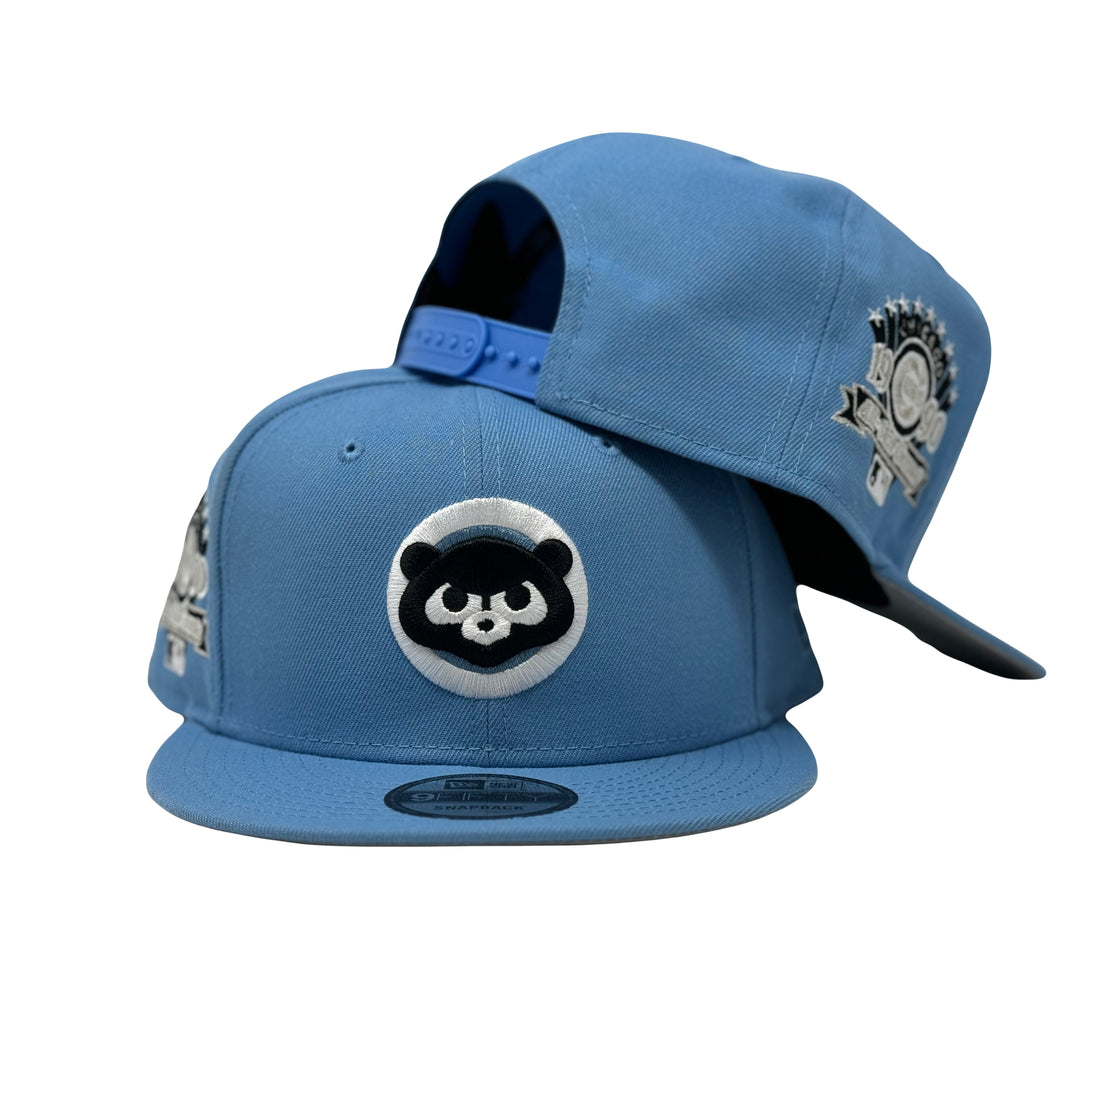 Chicago Cubs 1990 All Star Game Sky Blue 9Fifty New Era Snapback hat